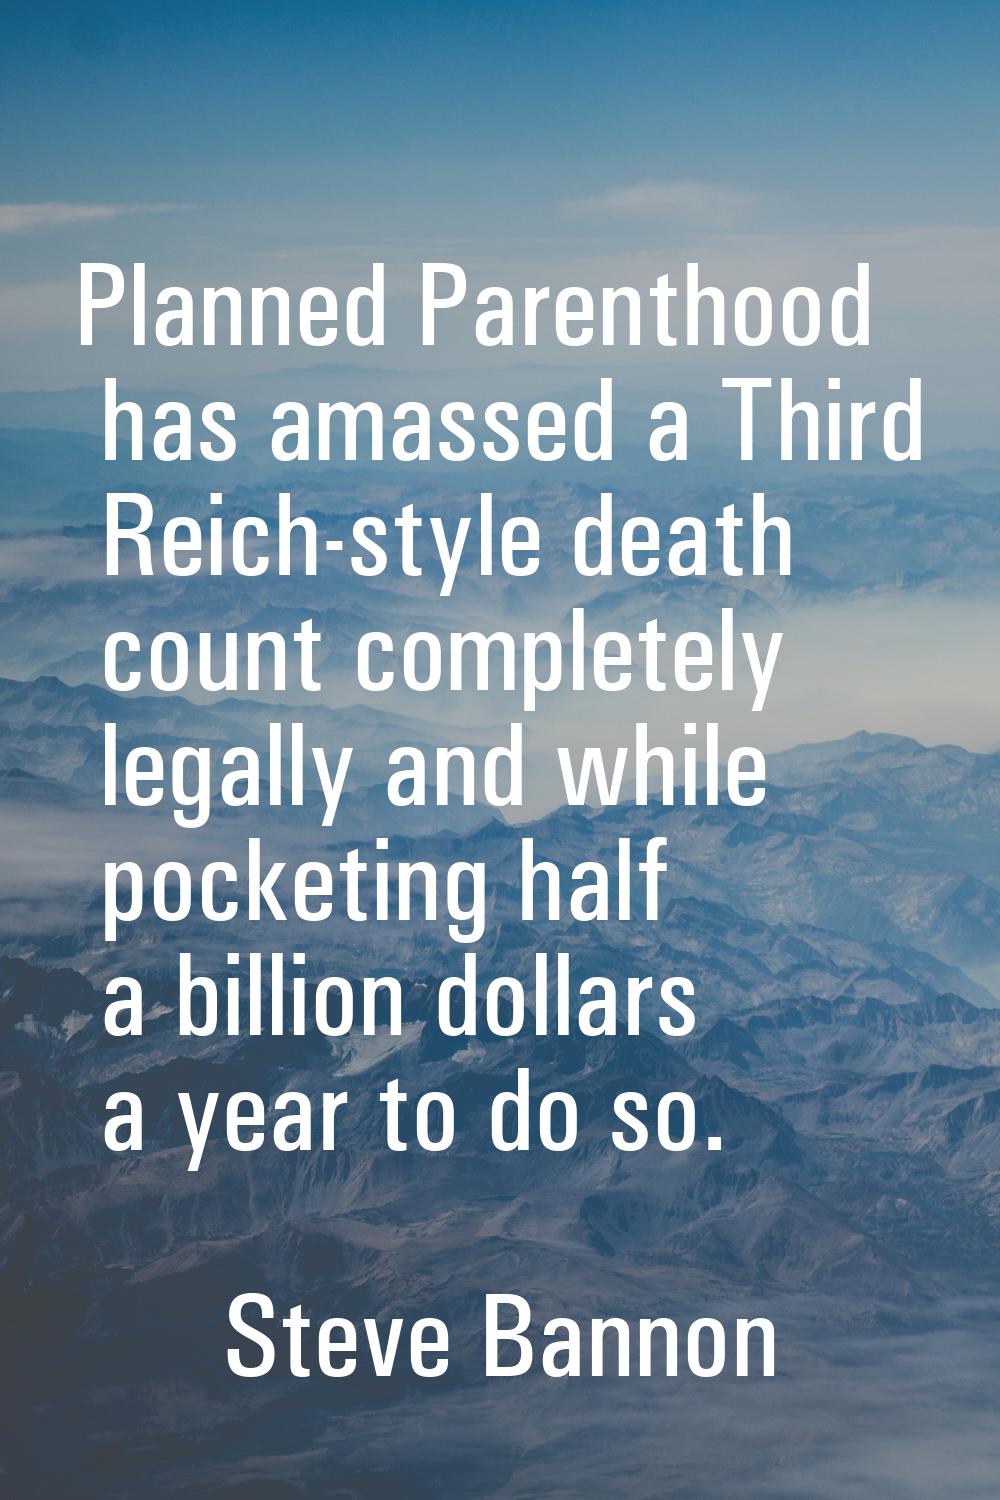 Planned Parenthood has amassed a Third Reich-style death count completely legally and while pocketi